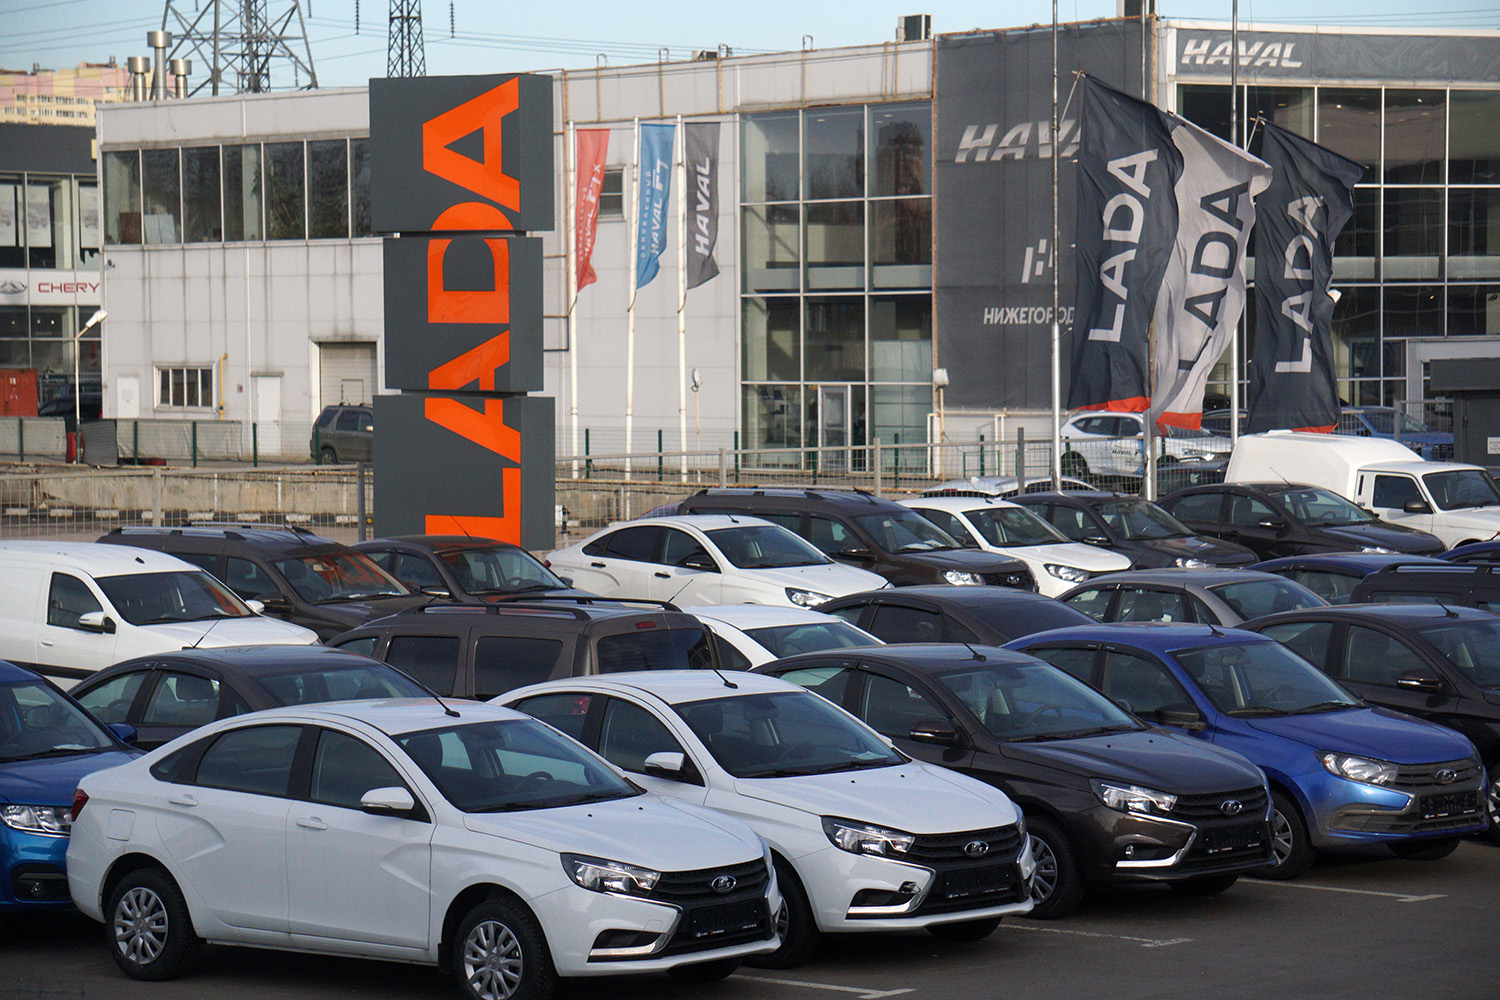 Lada car dealership in Moscow Russia full of new cars as sales decline